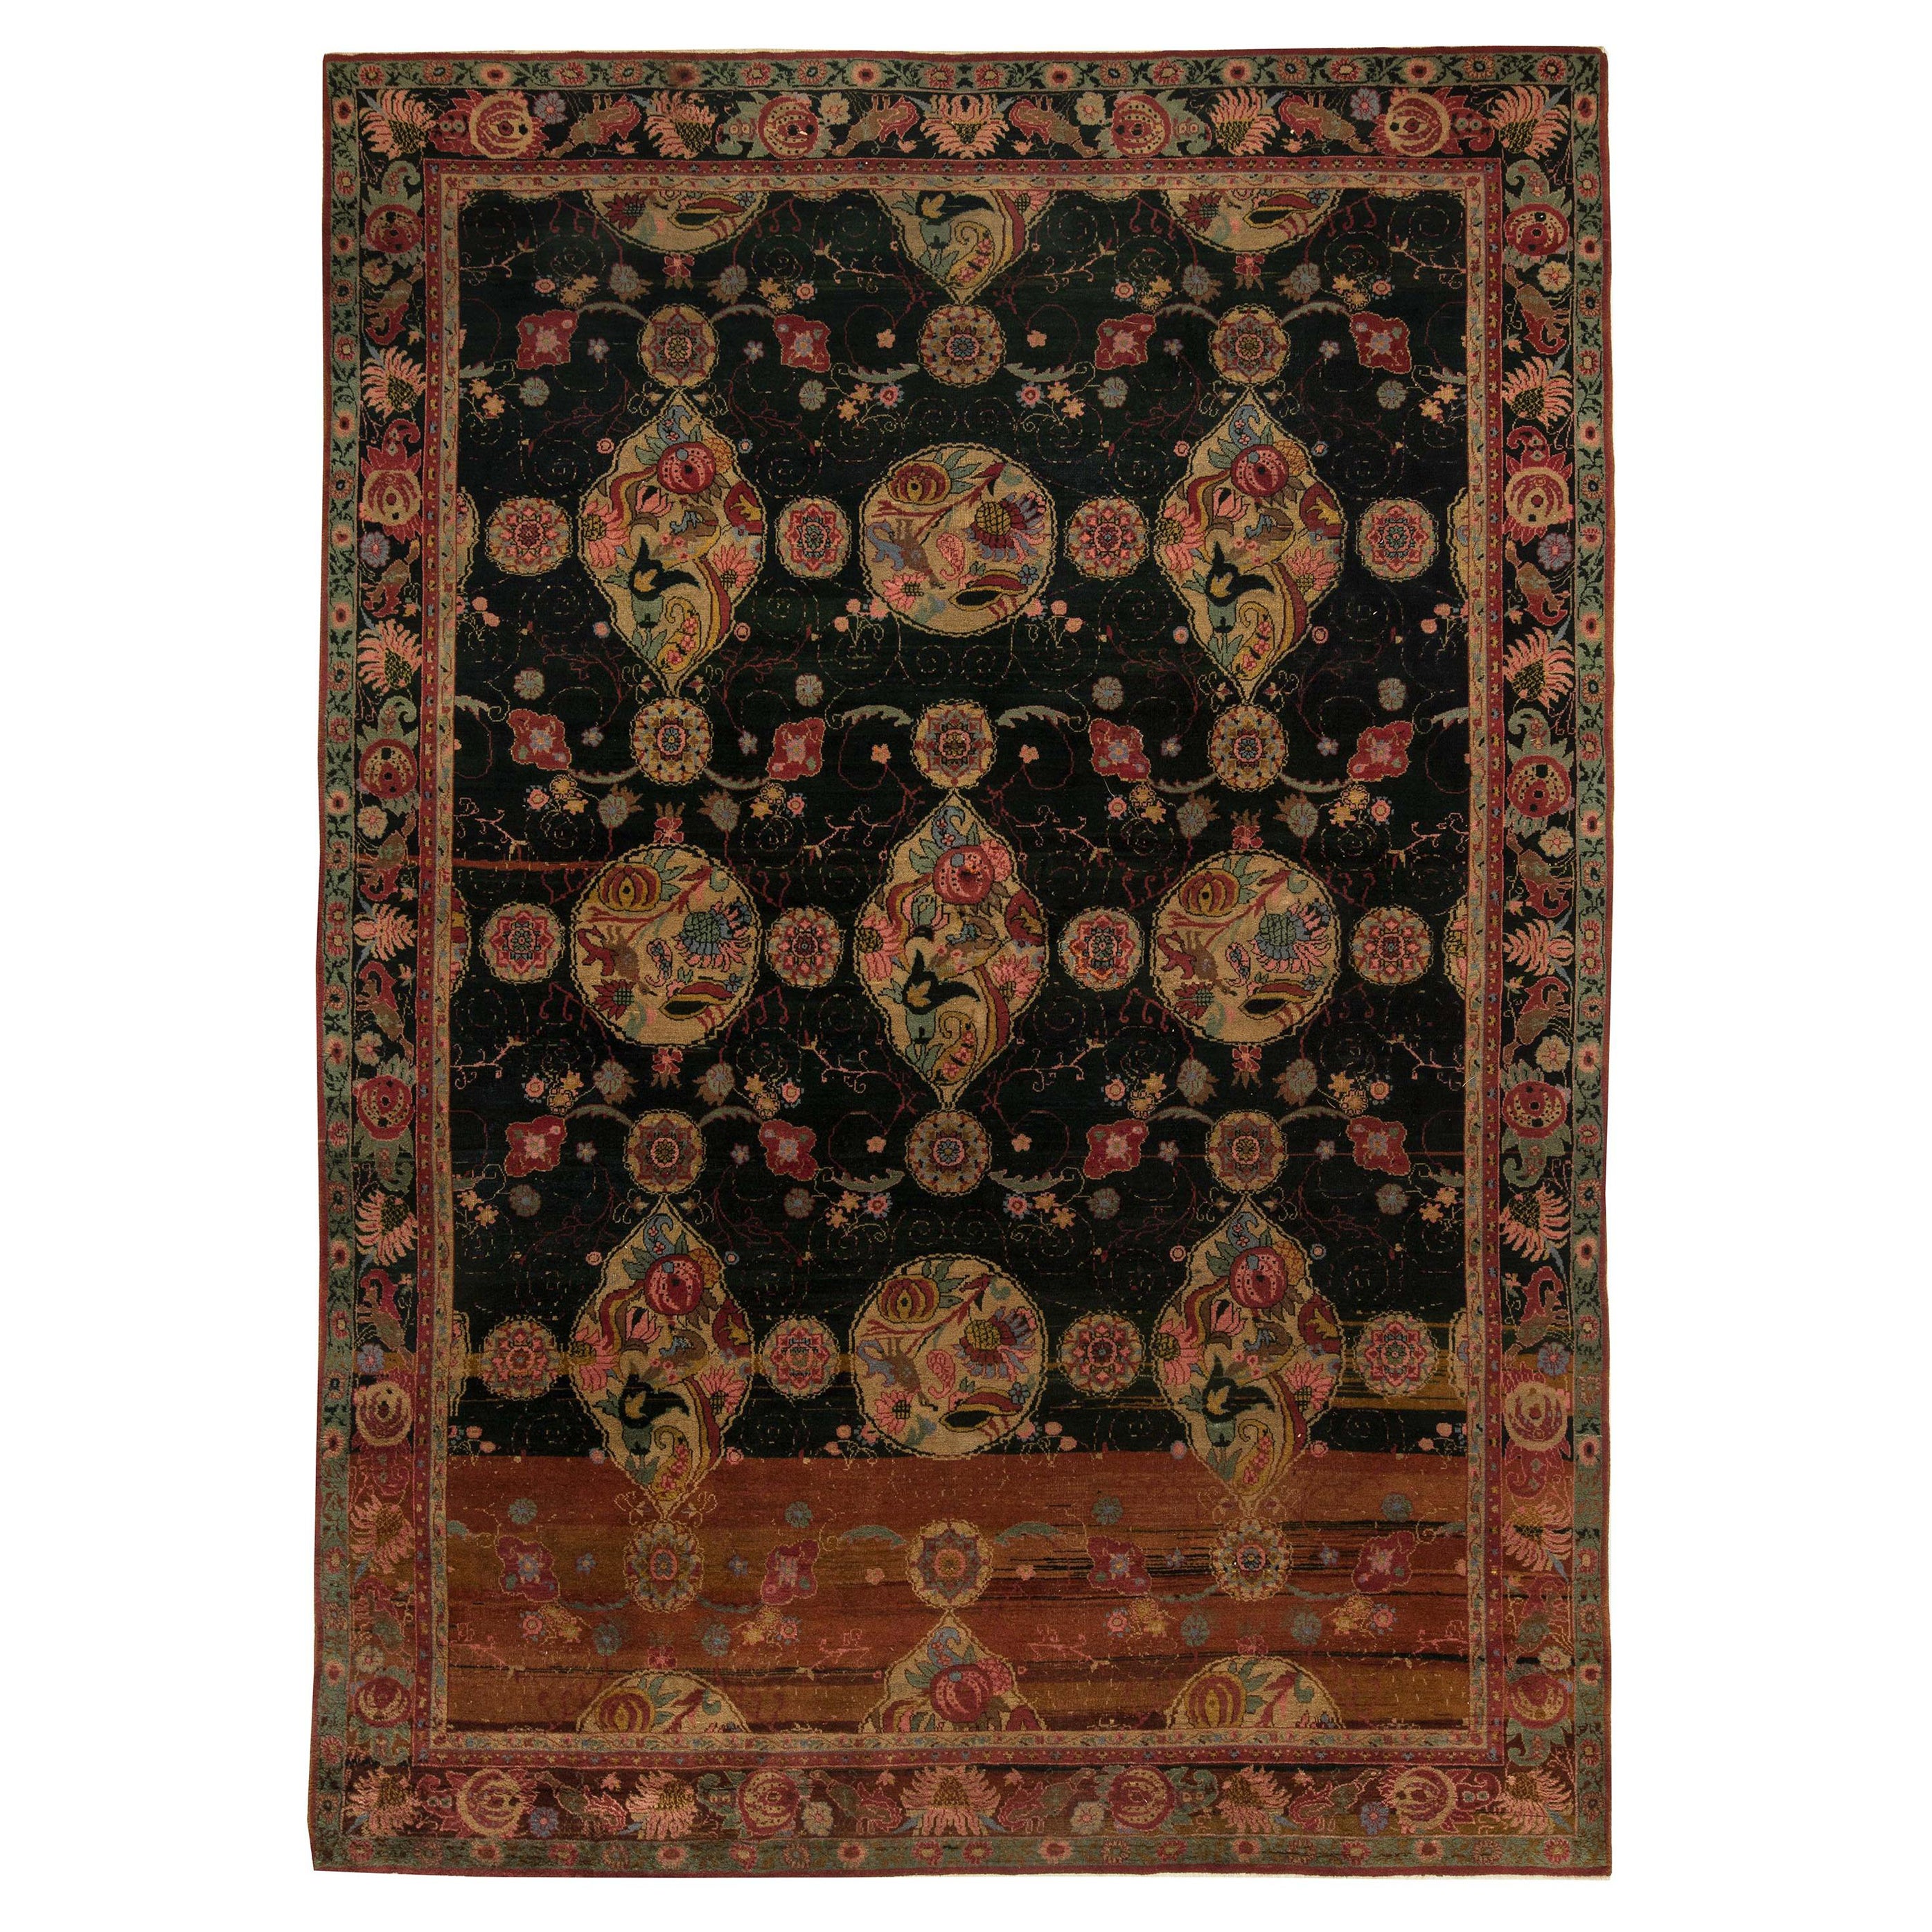 Authentic Indian Botanic Hand Knotted Wool Rug